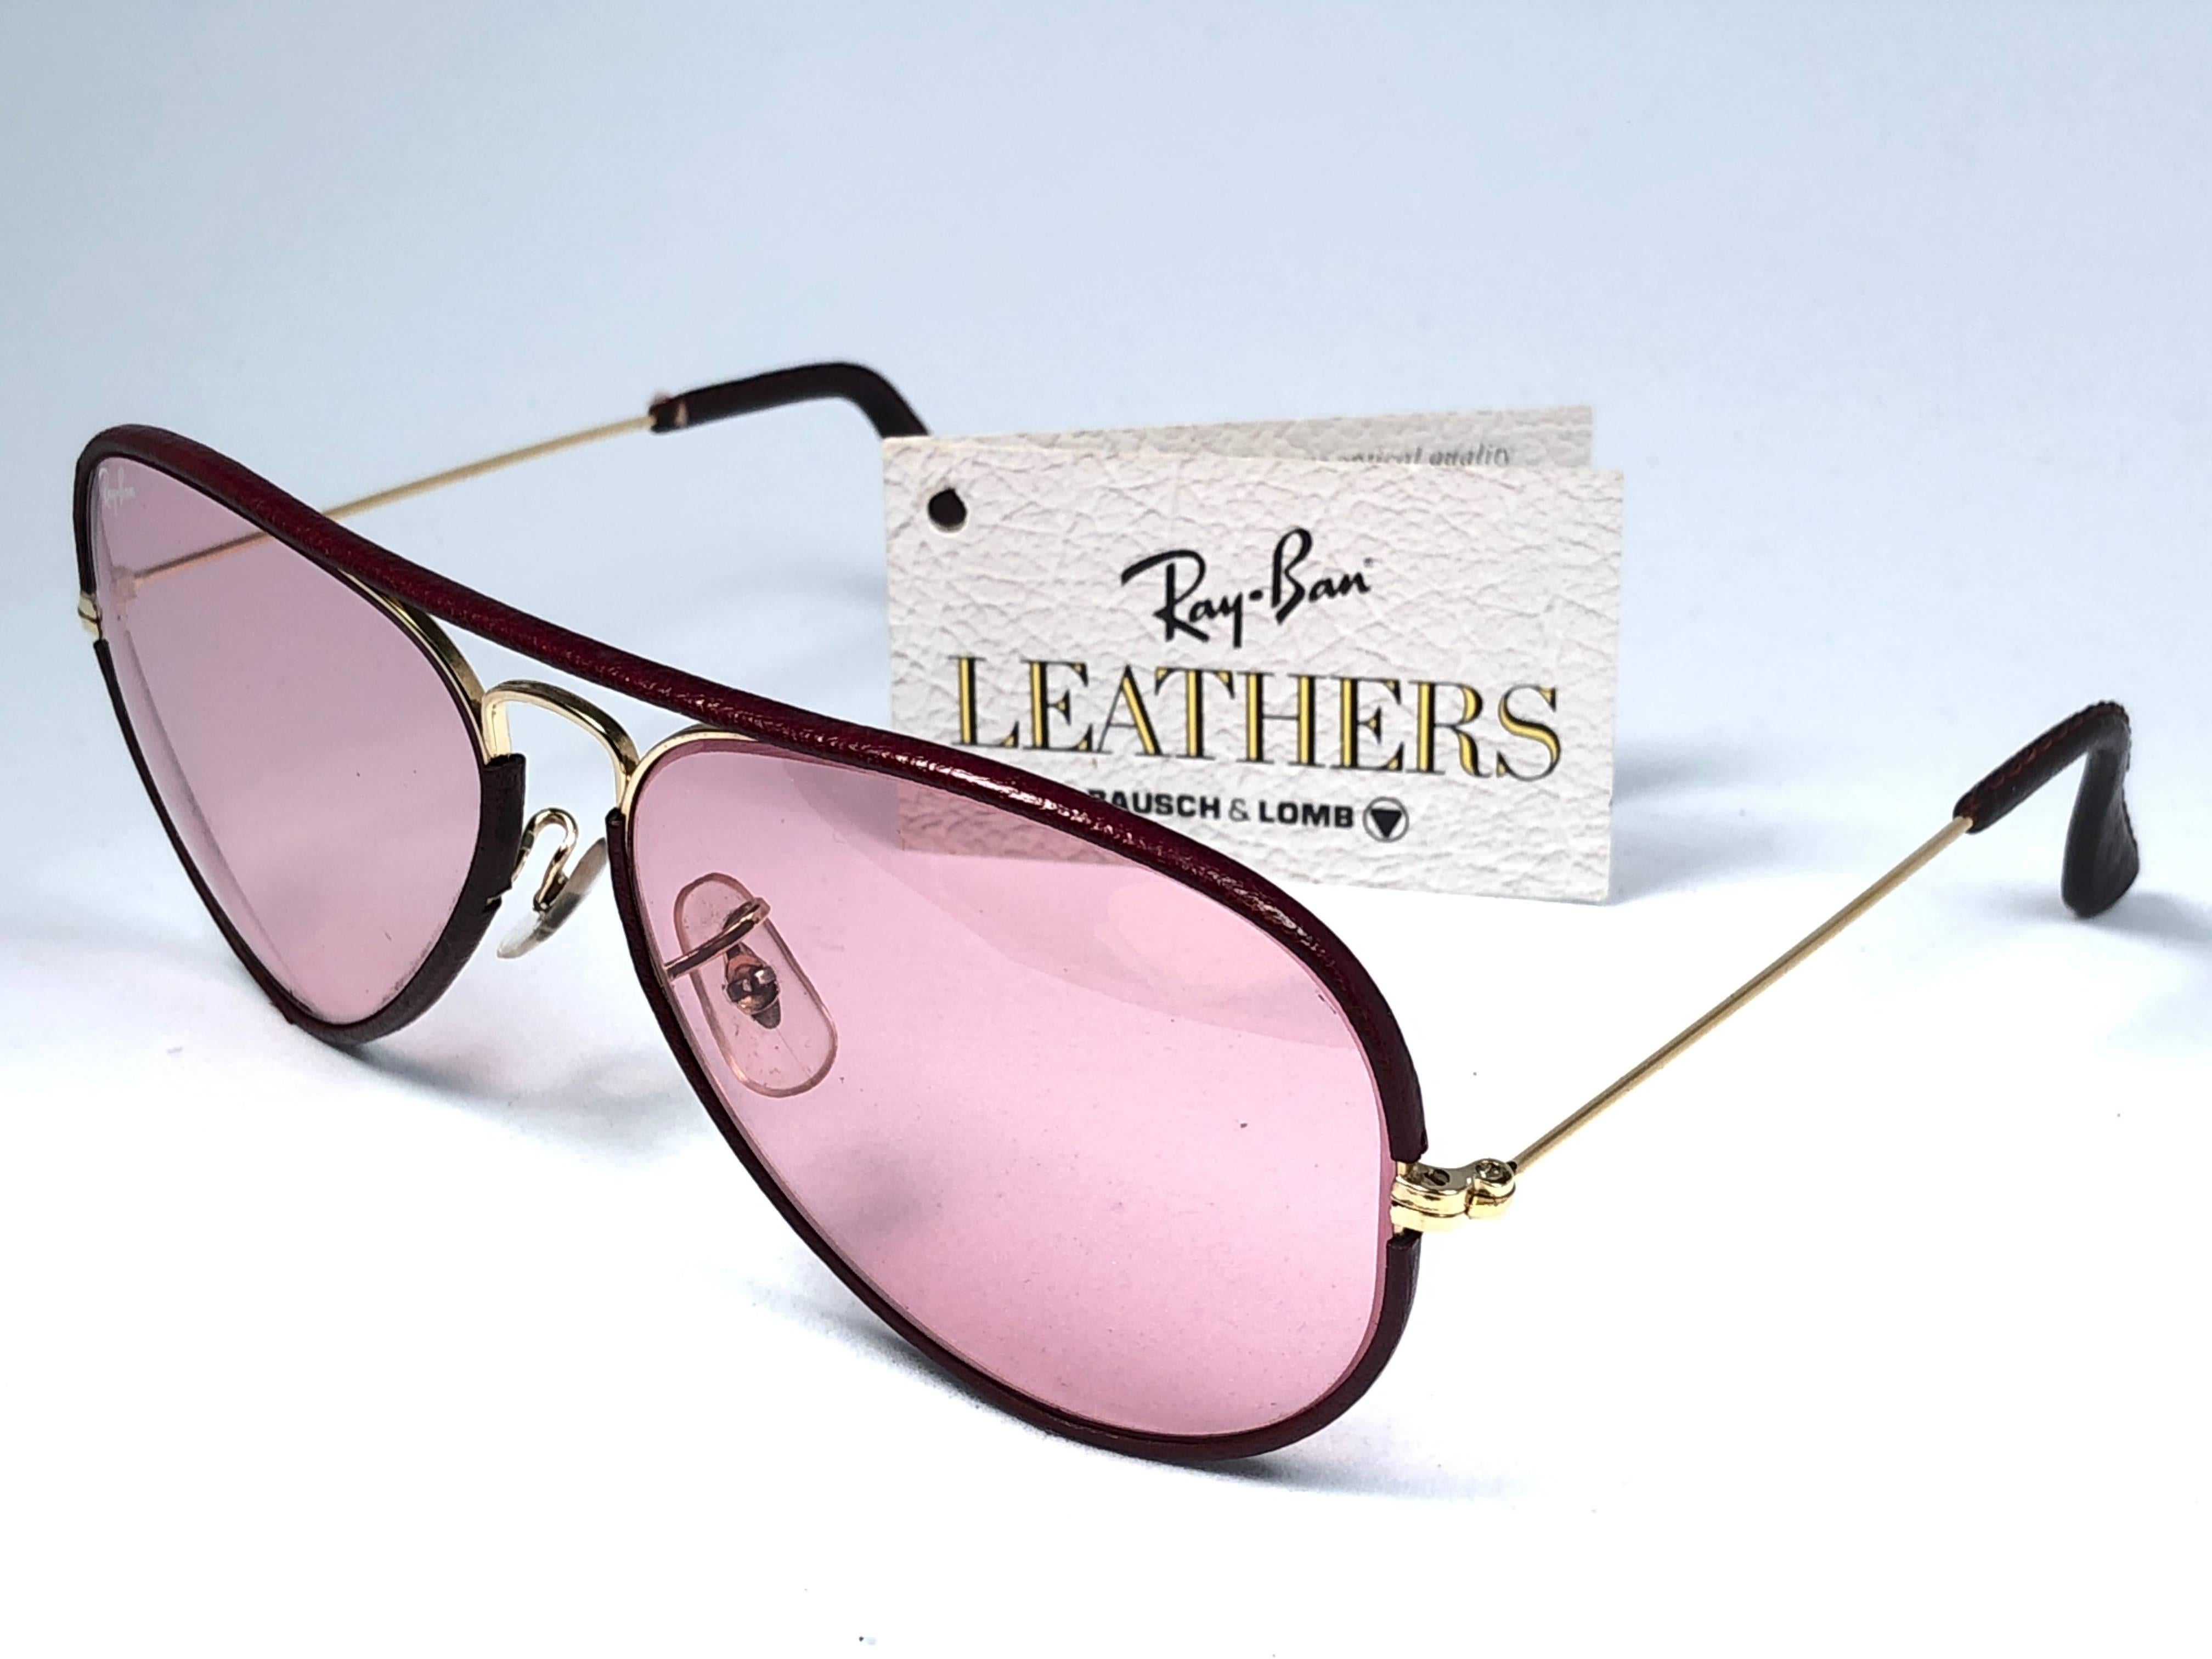 New Vintage Ray Ban Leathers Aviator 58mm in burgundy leather with gold metal combination frame sporting rose changeable lenses.

Comes with its original Ray Ban B&L case. This pair may show minor sign of wear due to storage. 
Rare and hard to find.